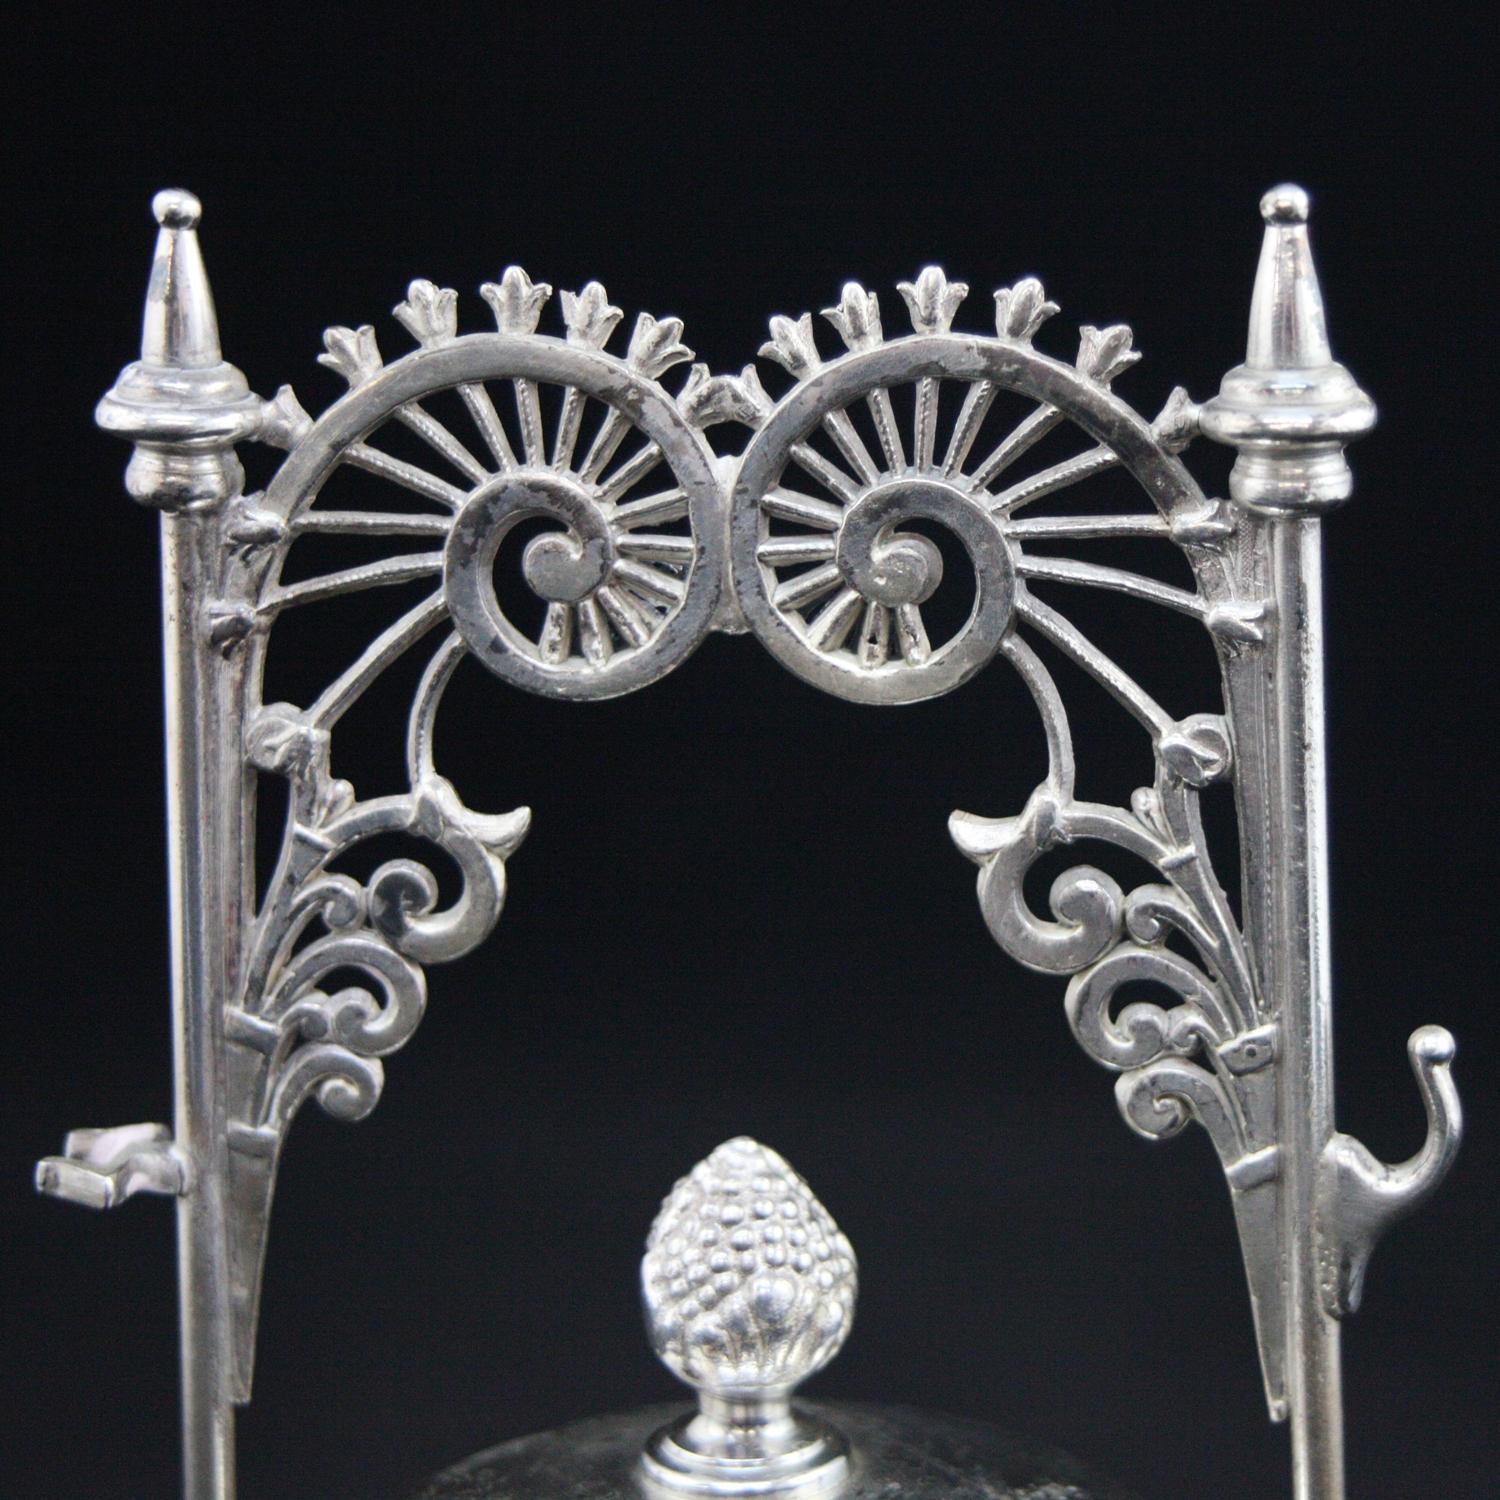 An antique Eastlake Wilcox Silver Plate Co. pickle caster features footed frame with pierced scrolled nautilus shell form handles and pressed glass jar having silver plate lid with acorn finial, circa 1898

***DELIVERY NOTICE – Due to COVID-19 we